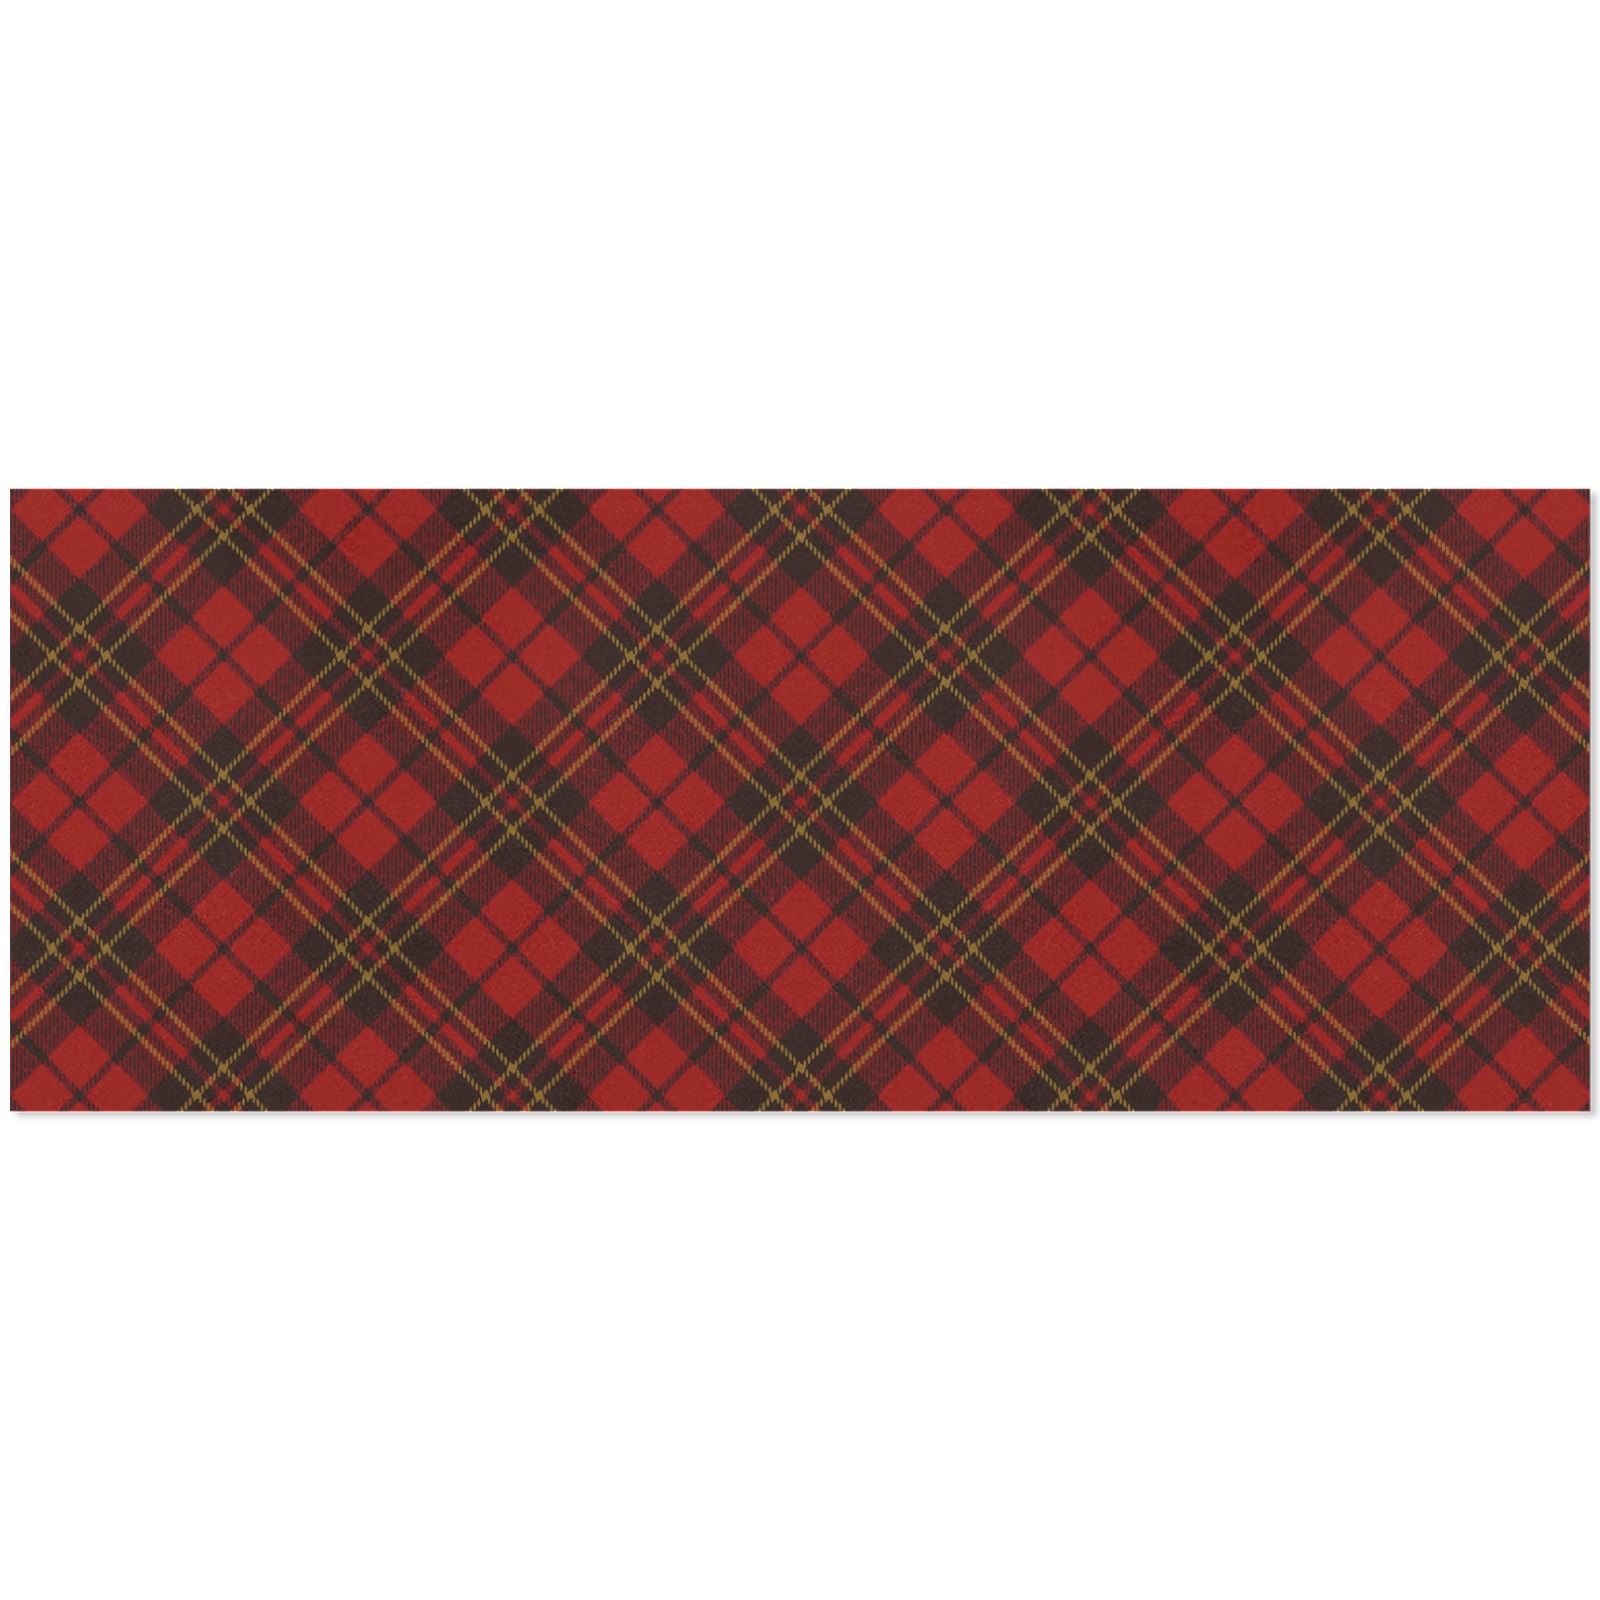 Red tartan plaid winter Christmas pattern holidays Gift Wrapping Paper 58"x 23" (5 Rolls)